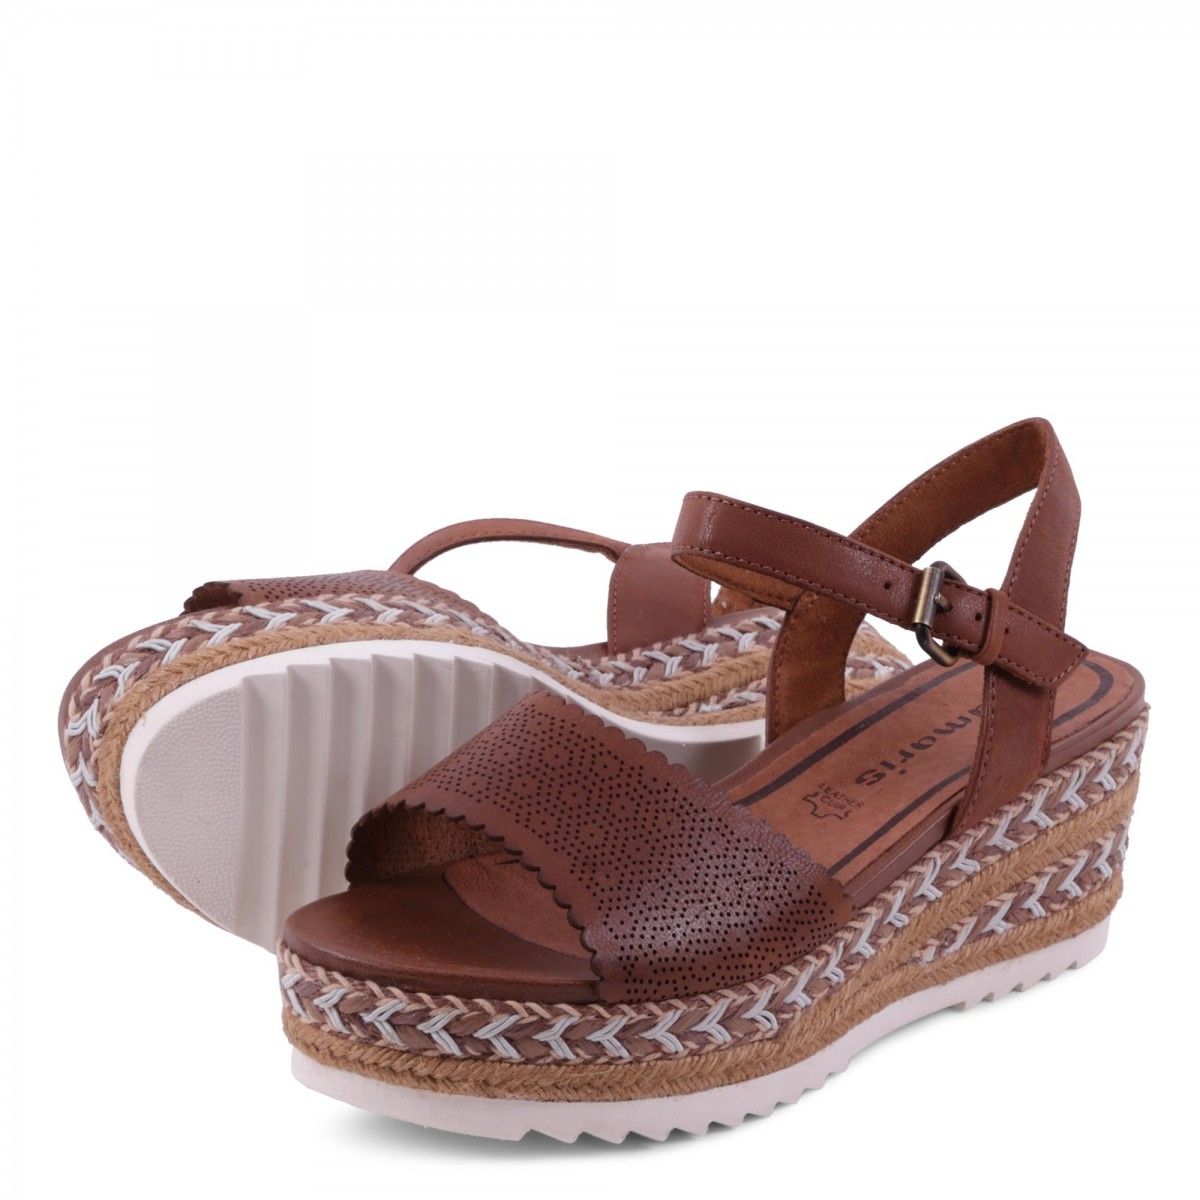 WOMENS SHOES 1-28370-28